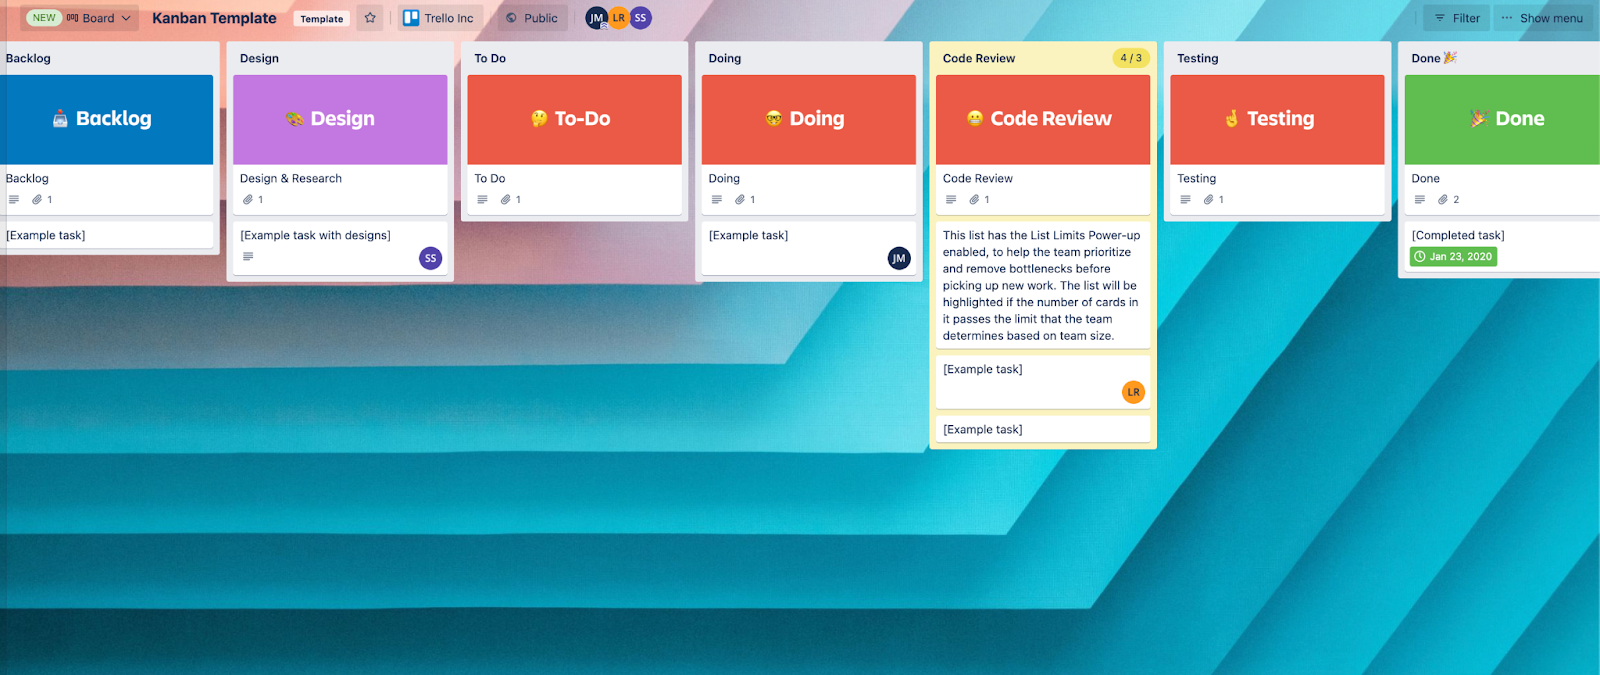 Photo of a Kanban board in Trello, with lists designated left to right as “Backlog,” “Design,” “To Do,” “Doing,” “Code Review,” “Testing,” and “Done”